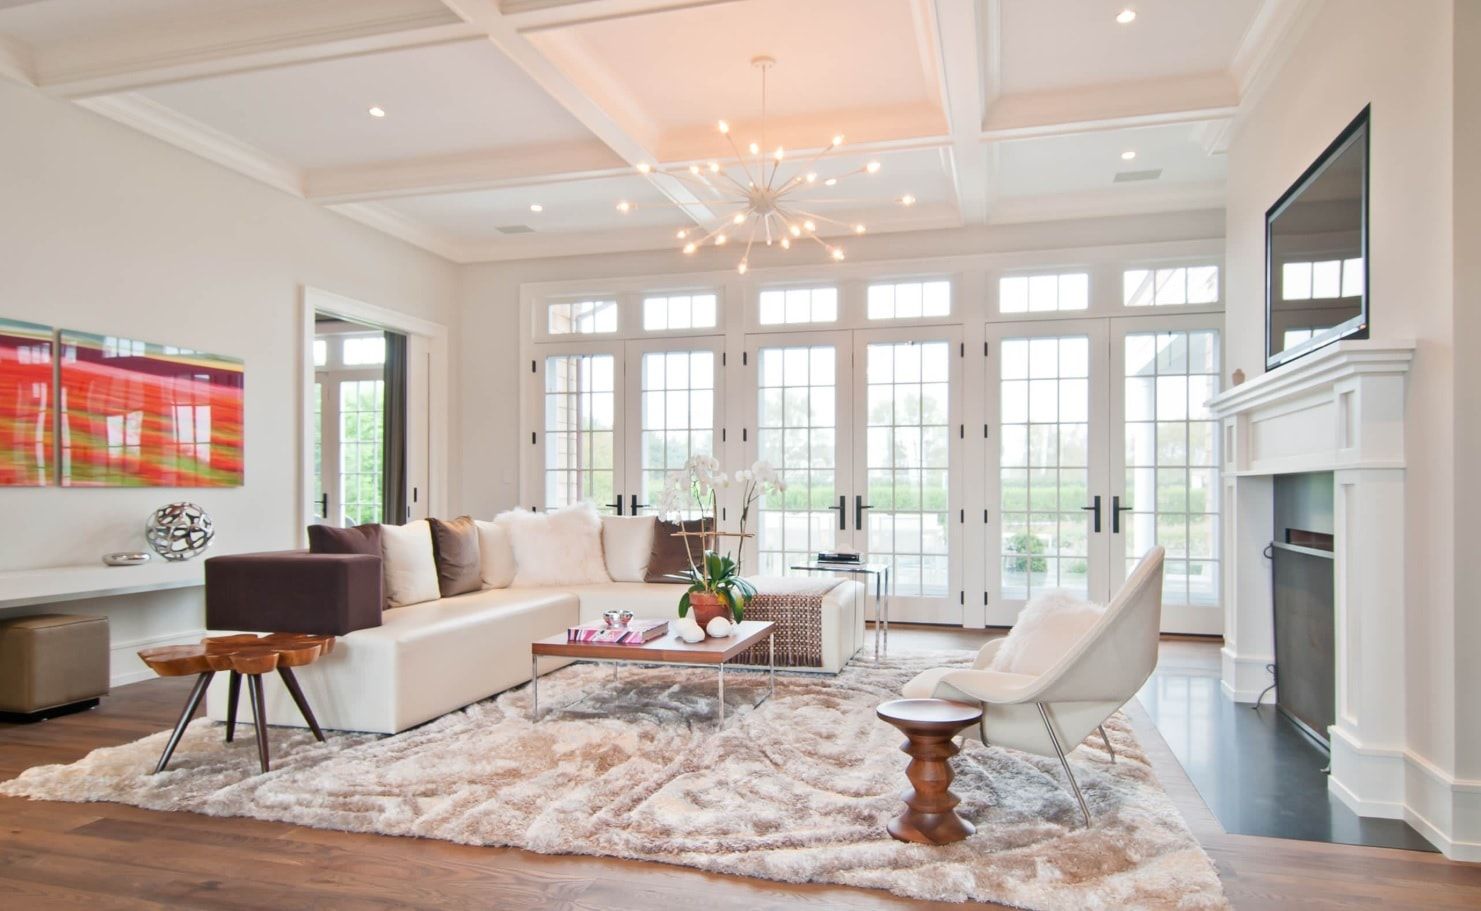 Classic snow white decoration for large living room with coffered ceiling and dotted chandelier